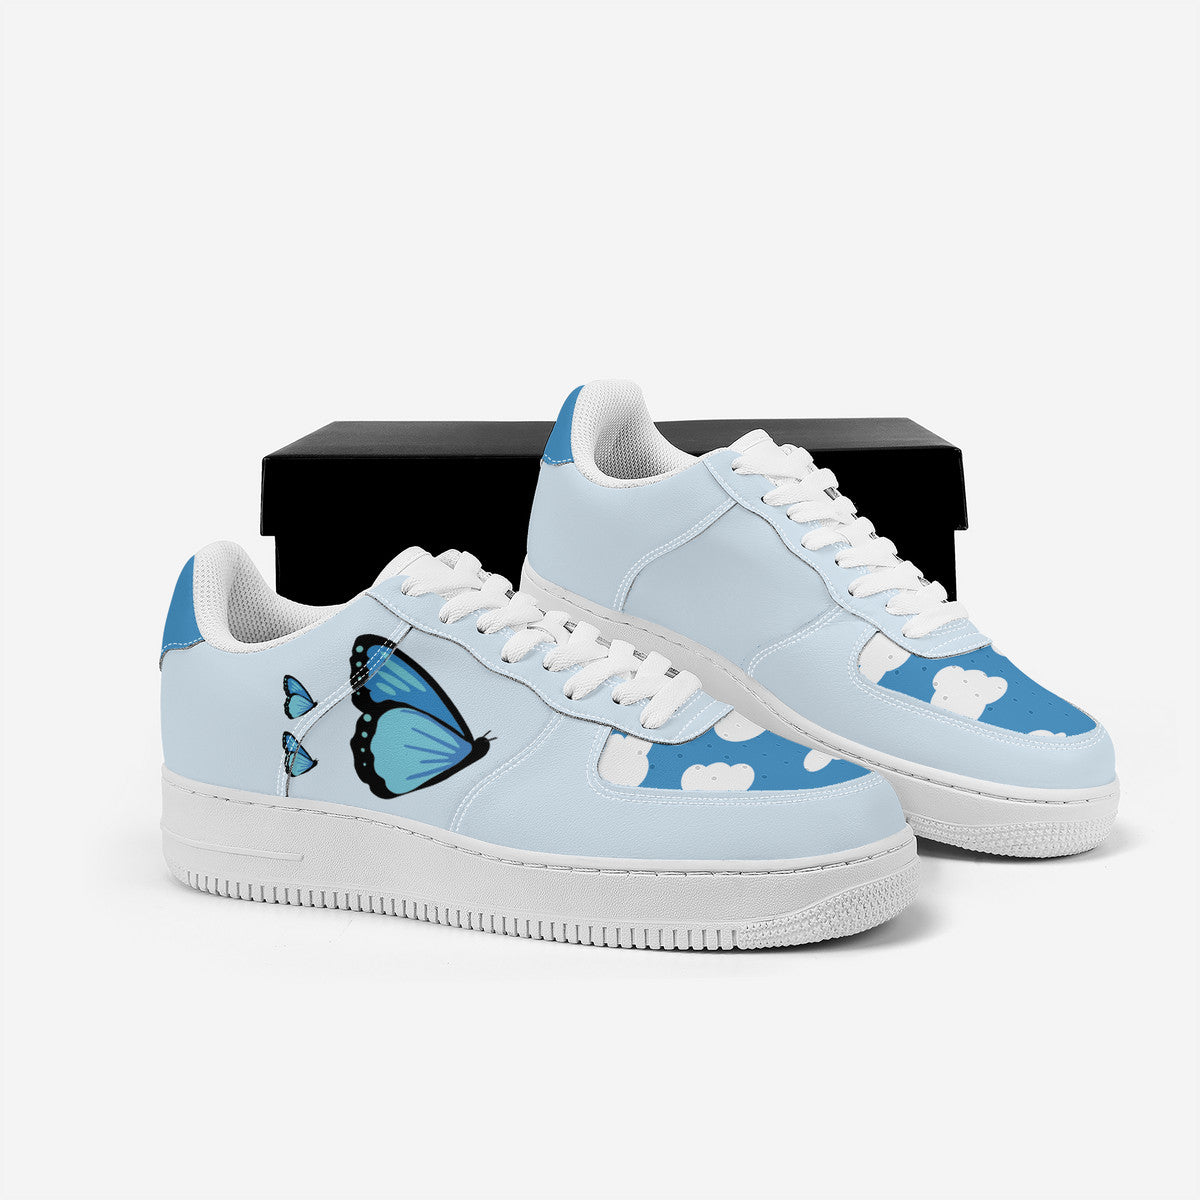 Cool shoes by Olivia C | Low Top Customized | Shoe Zero